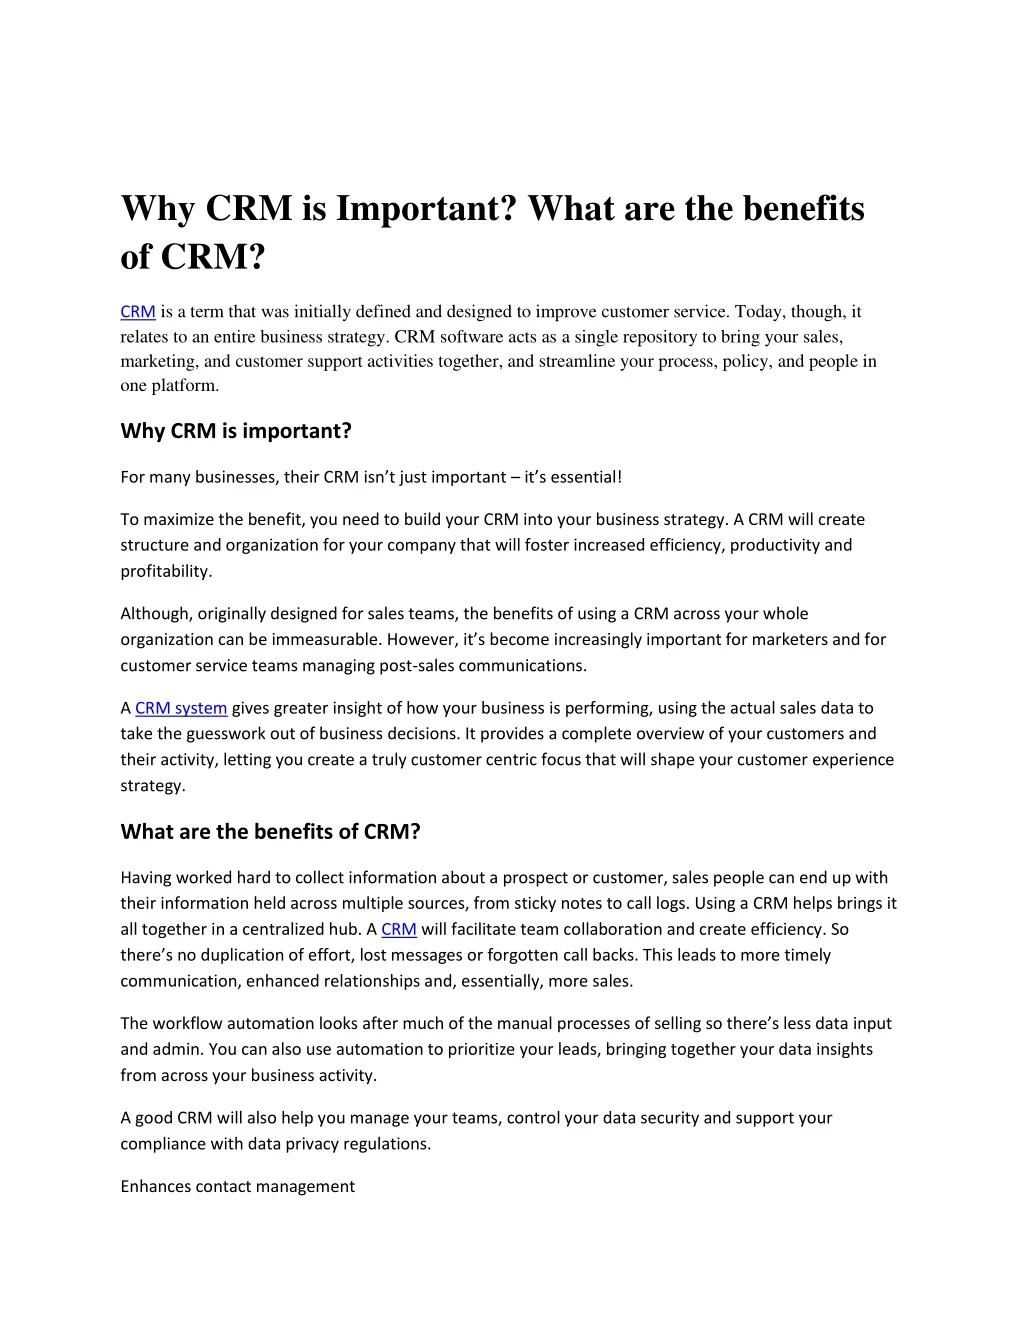 why crm is important what are the benefits of crm